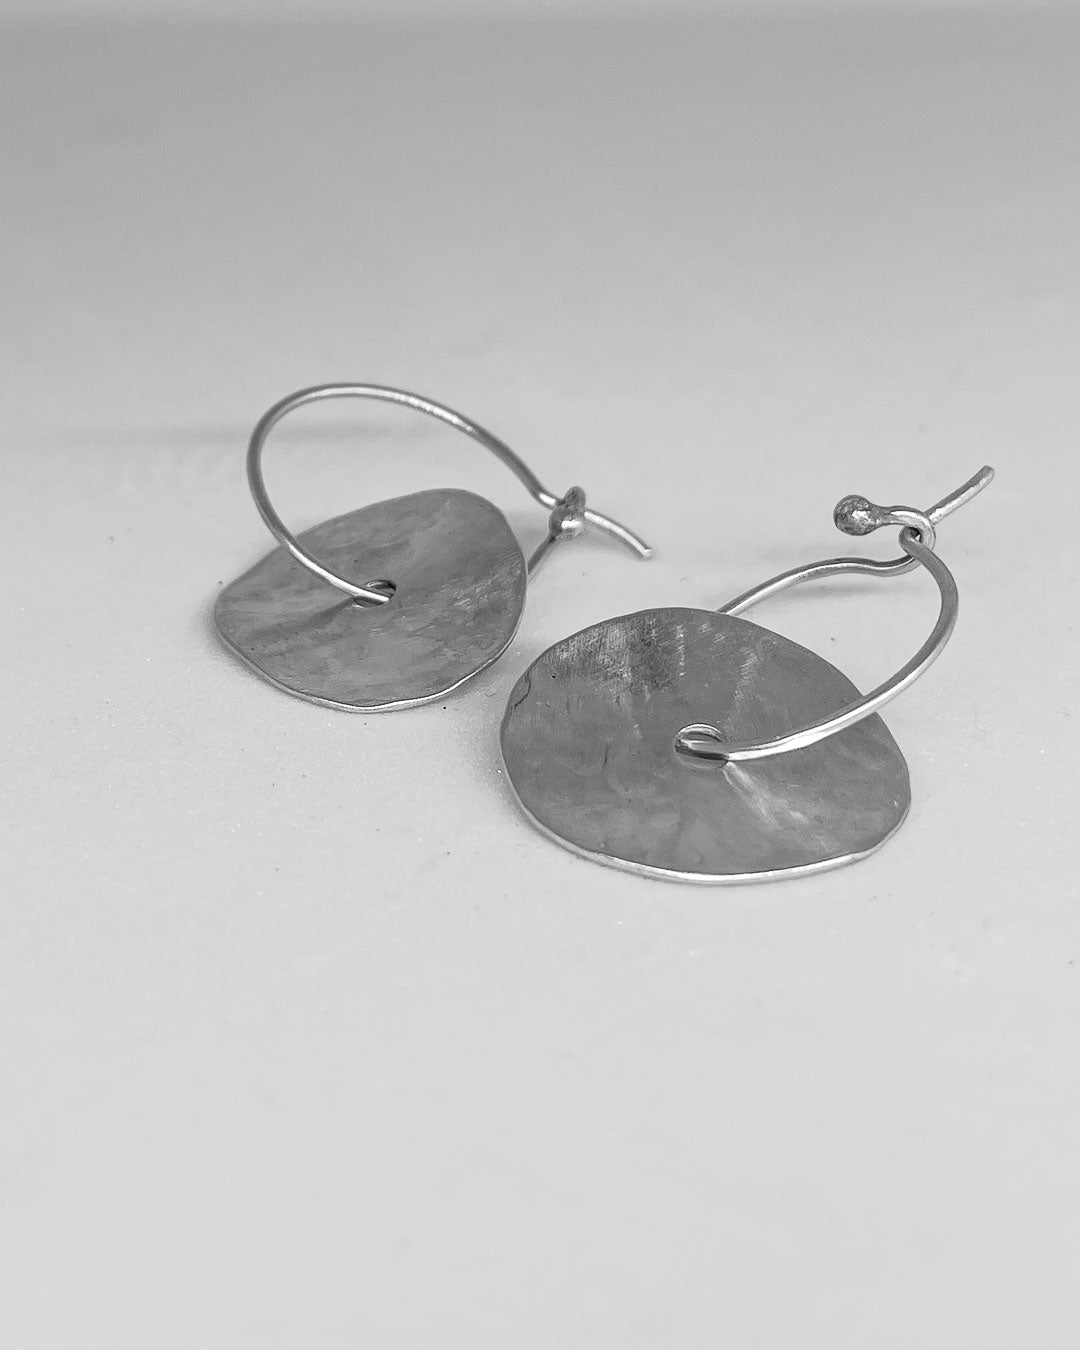 A pair of discs of Sterling Silver that sits on a hoop earring